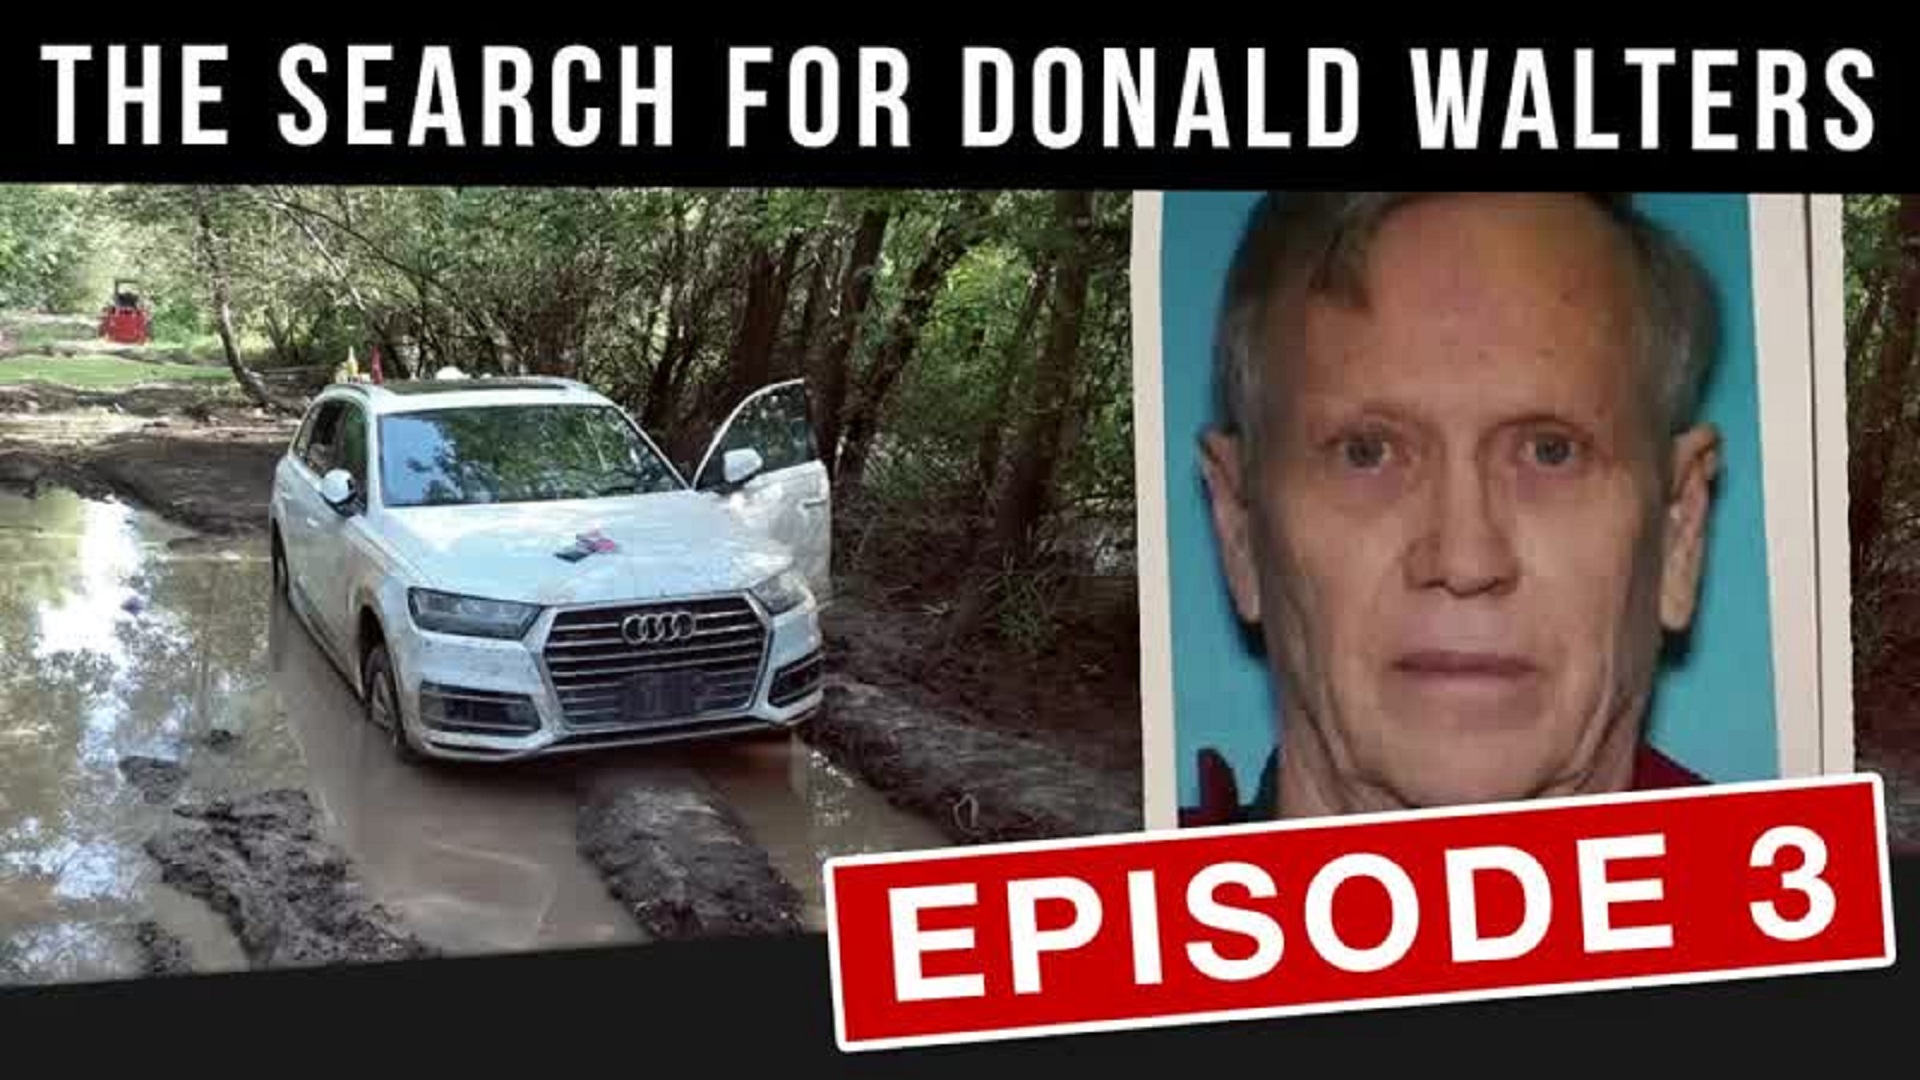 The Search for Donald Walters / Episode 3